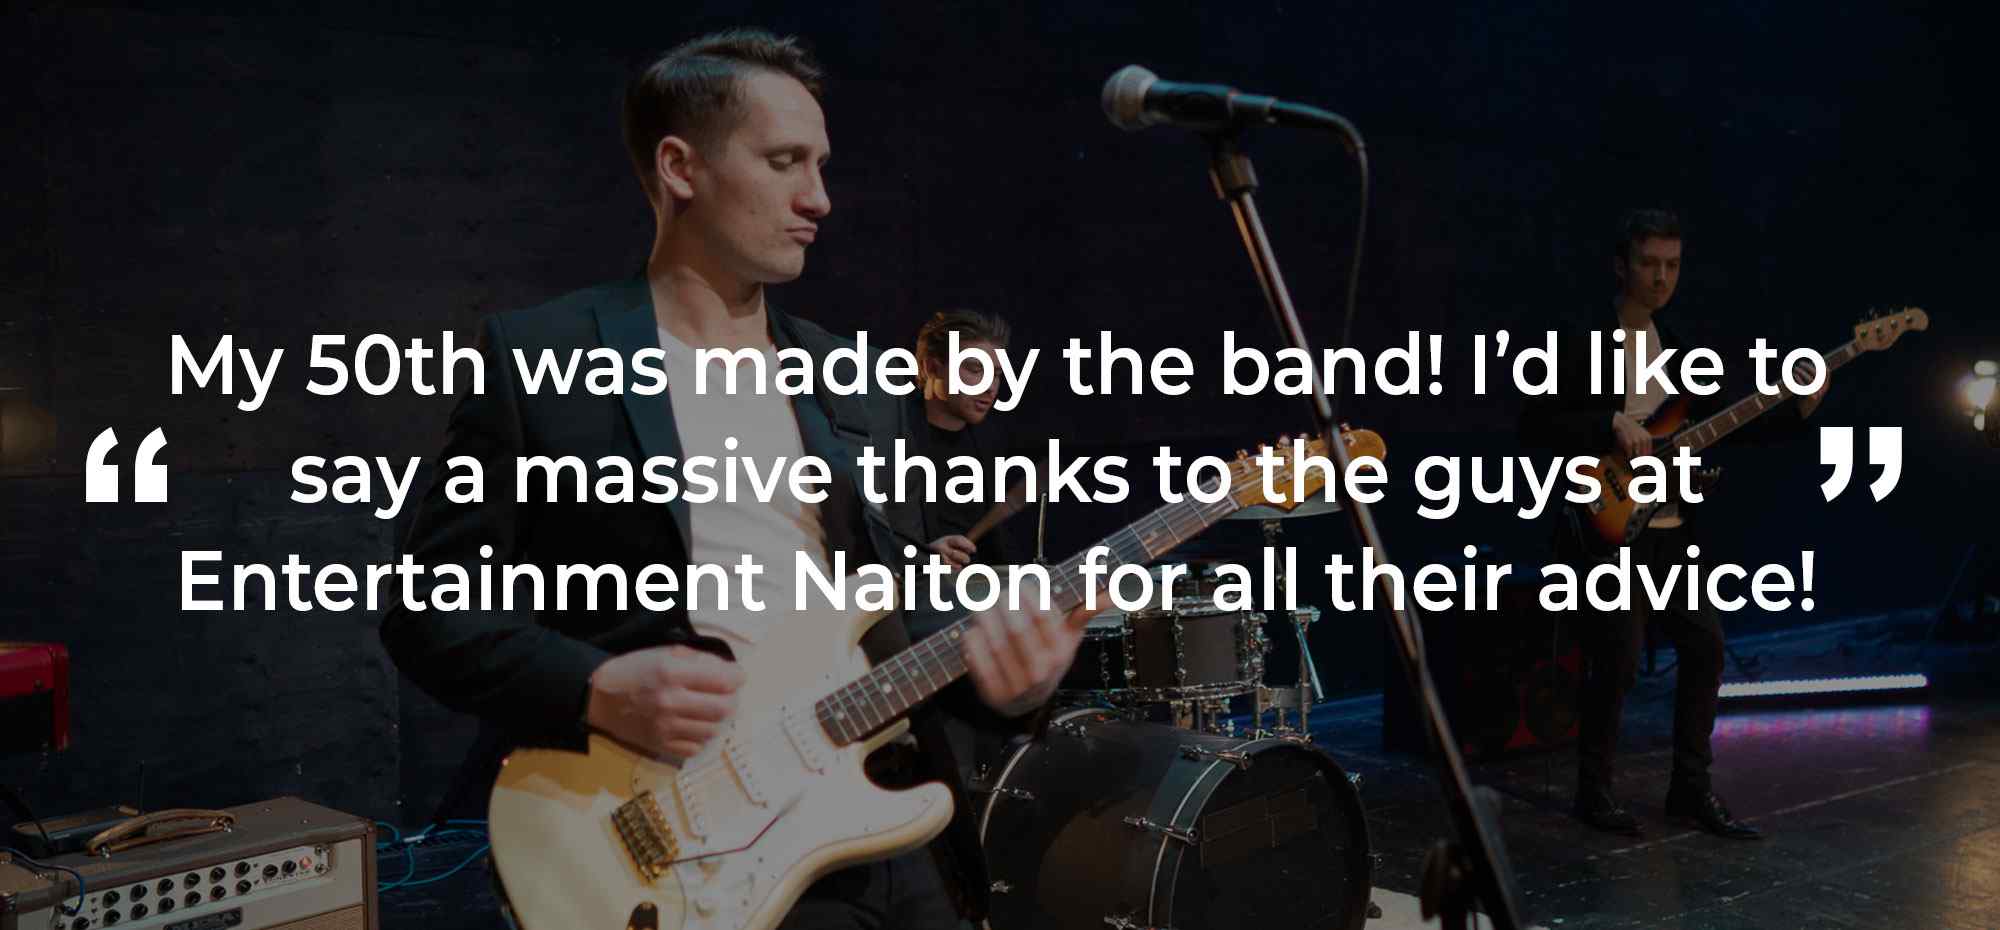 Client Review of a Party Band Gloucestershire